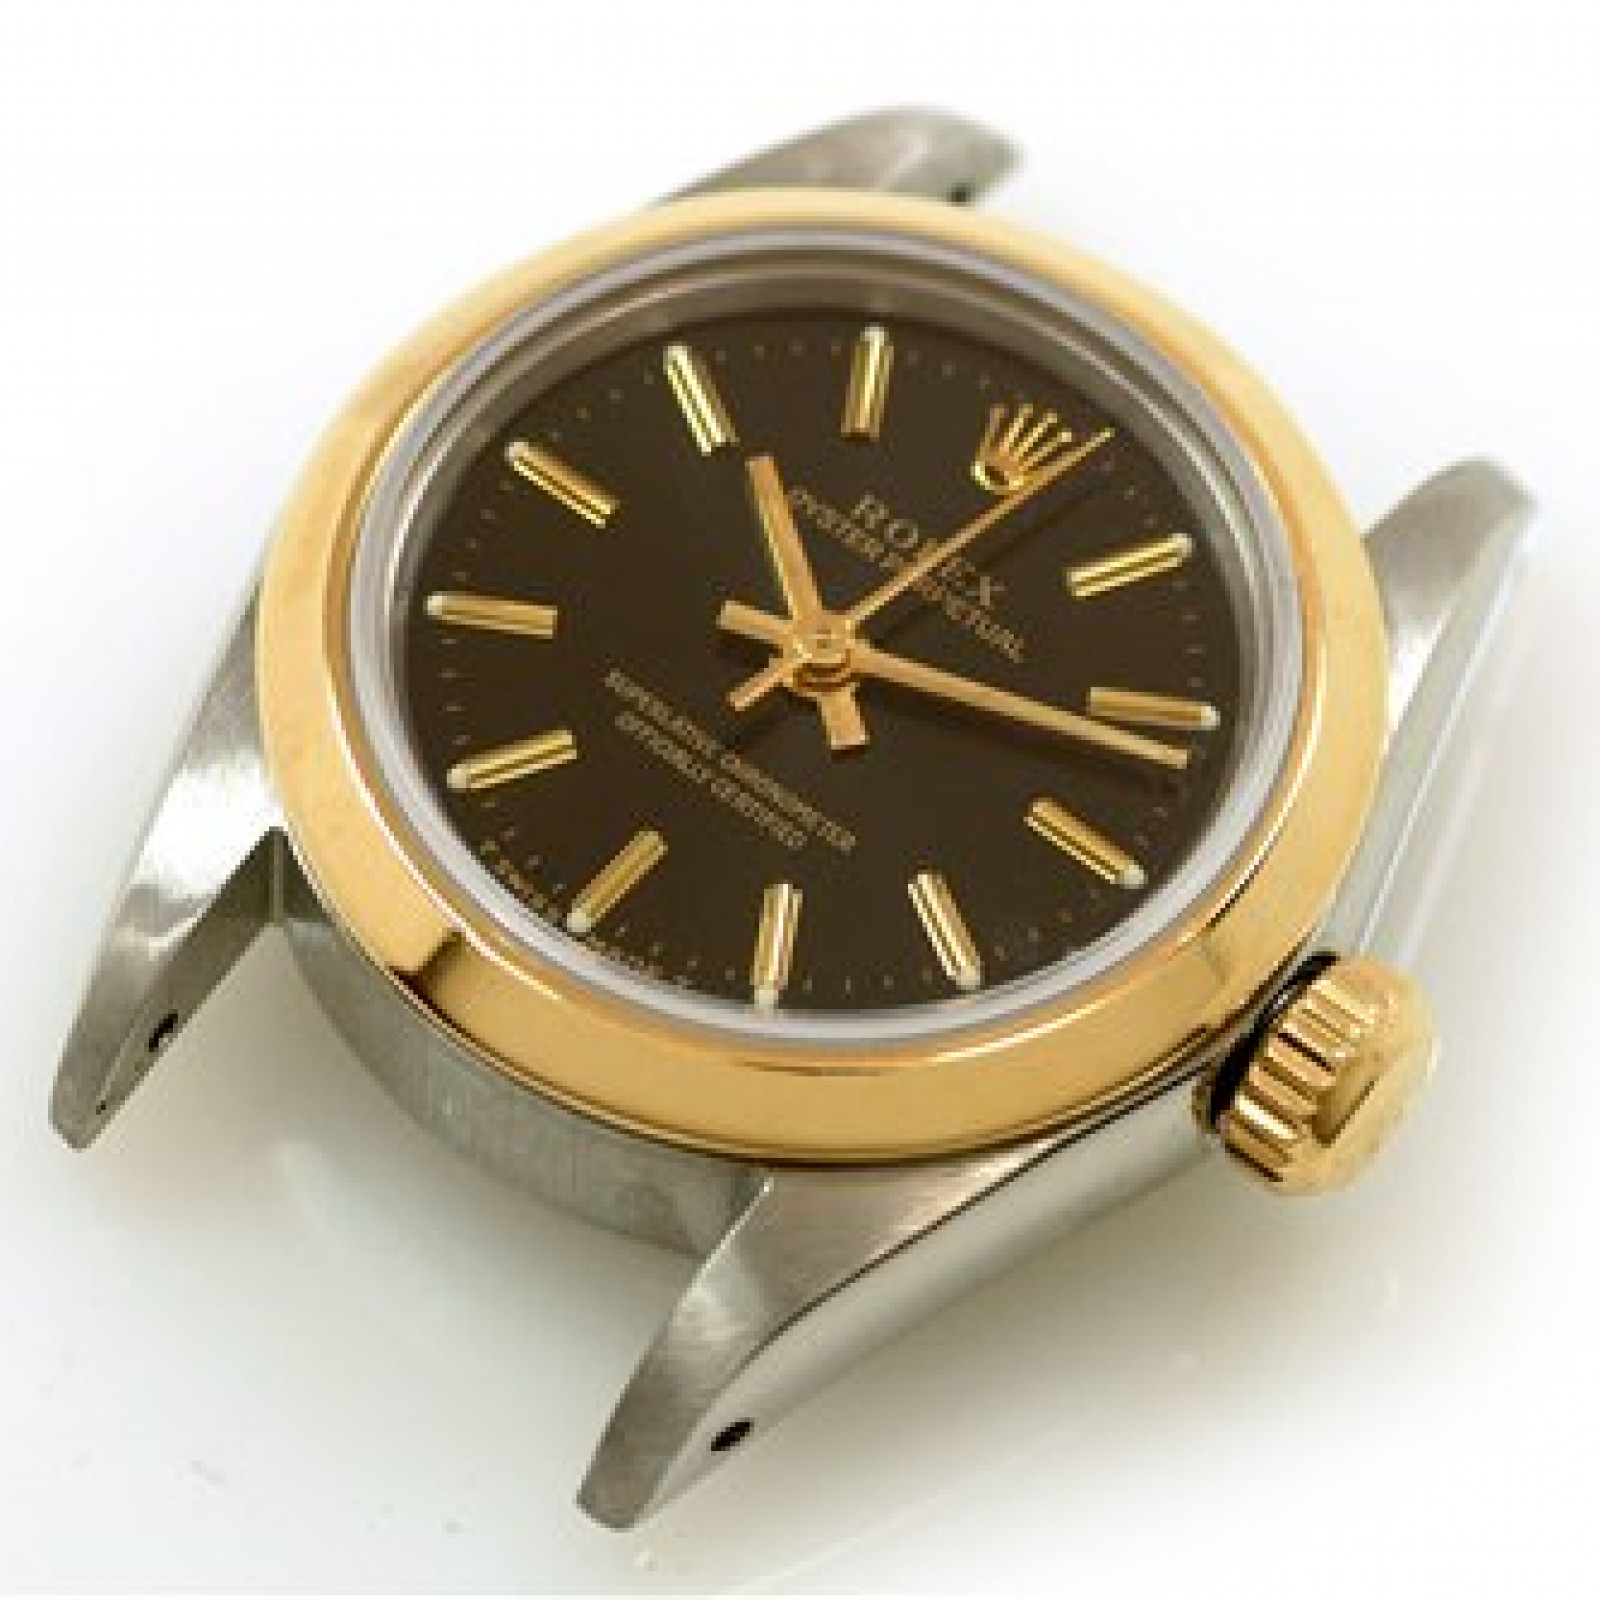 Rolex Oyster Perpetual 67183 Gold & Steel